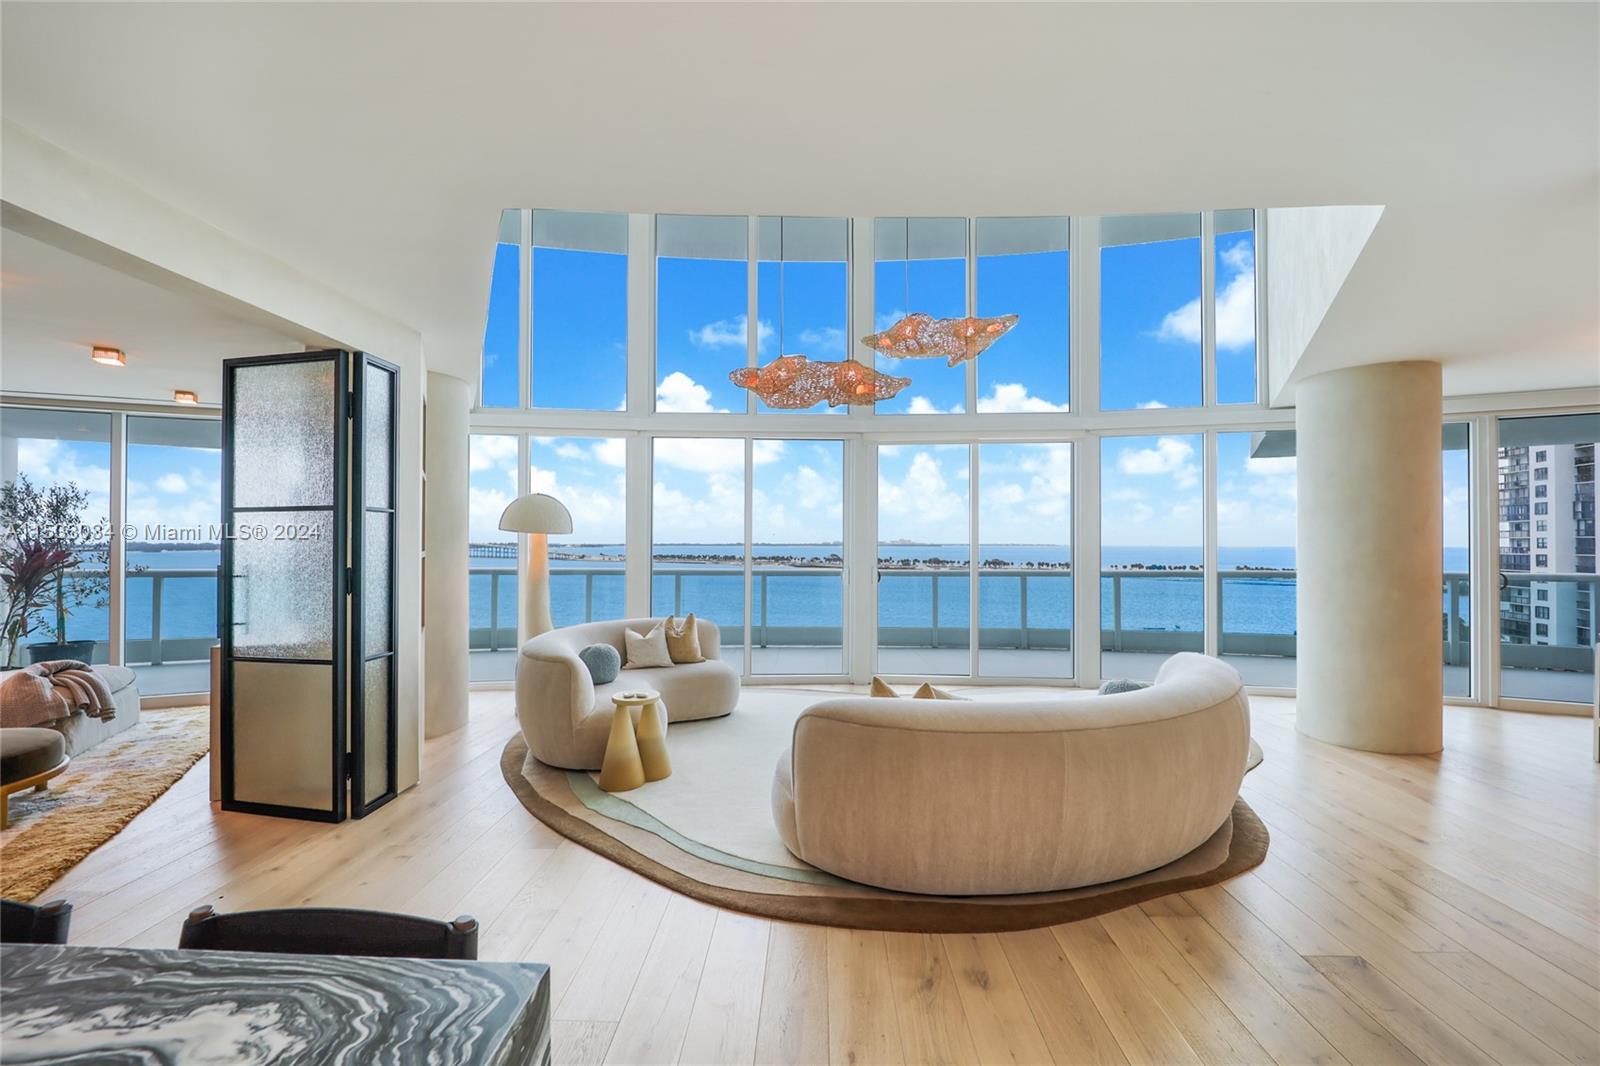 Indulge yourself in absolute luxury, in this rarely available, 2 floor duplex located in the iconic, Bristol Tower.  Featuring 18 foot, floor to ceiling windows to enjoy breathtaking views of Biscayne Bay and beyond.  This stunning 3 bedroom, 3 and a half bath condo with 744 SqFt of terrace, recently completed a full scale renovation utilizing the most exquisite finishes and meticulous craftsmanship. Every detail has been reimagined for a home that exceeds even the highest of expectations.